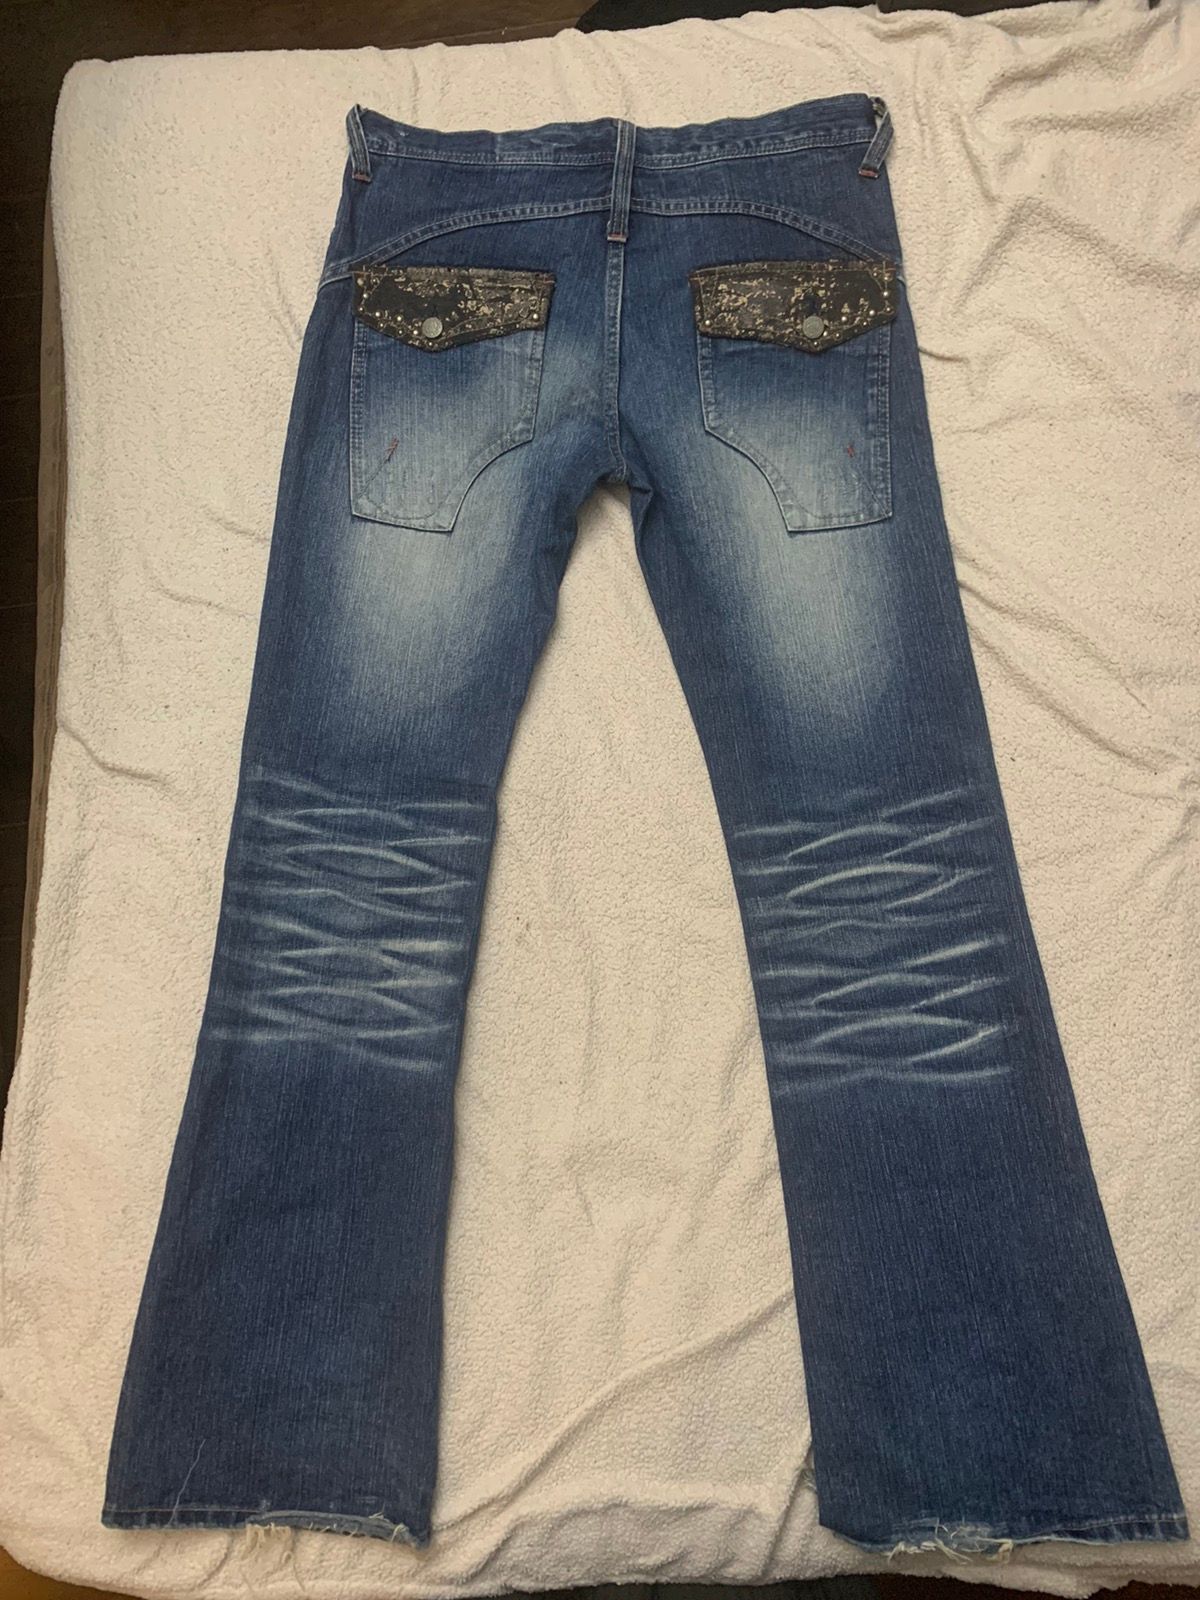 Vintage ICOM Low Rise Denim Distressed Flared Jeans With Design Size US 31 - 5 Thumbnail